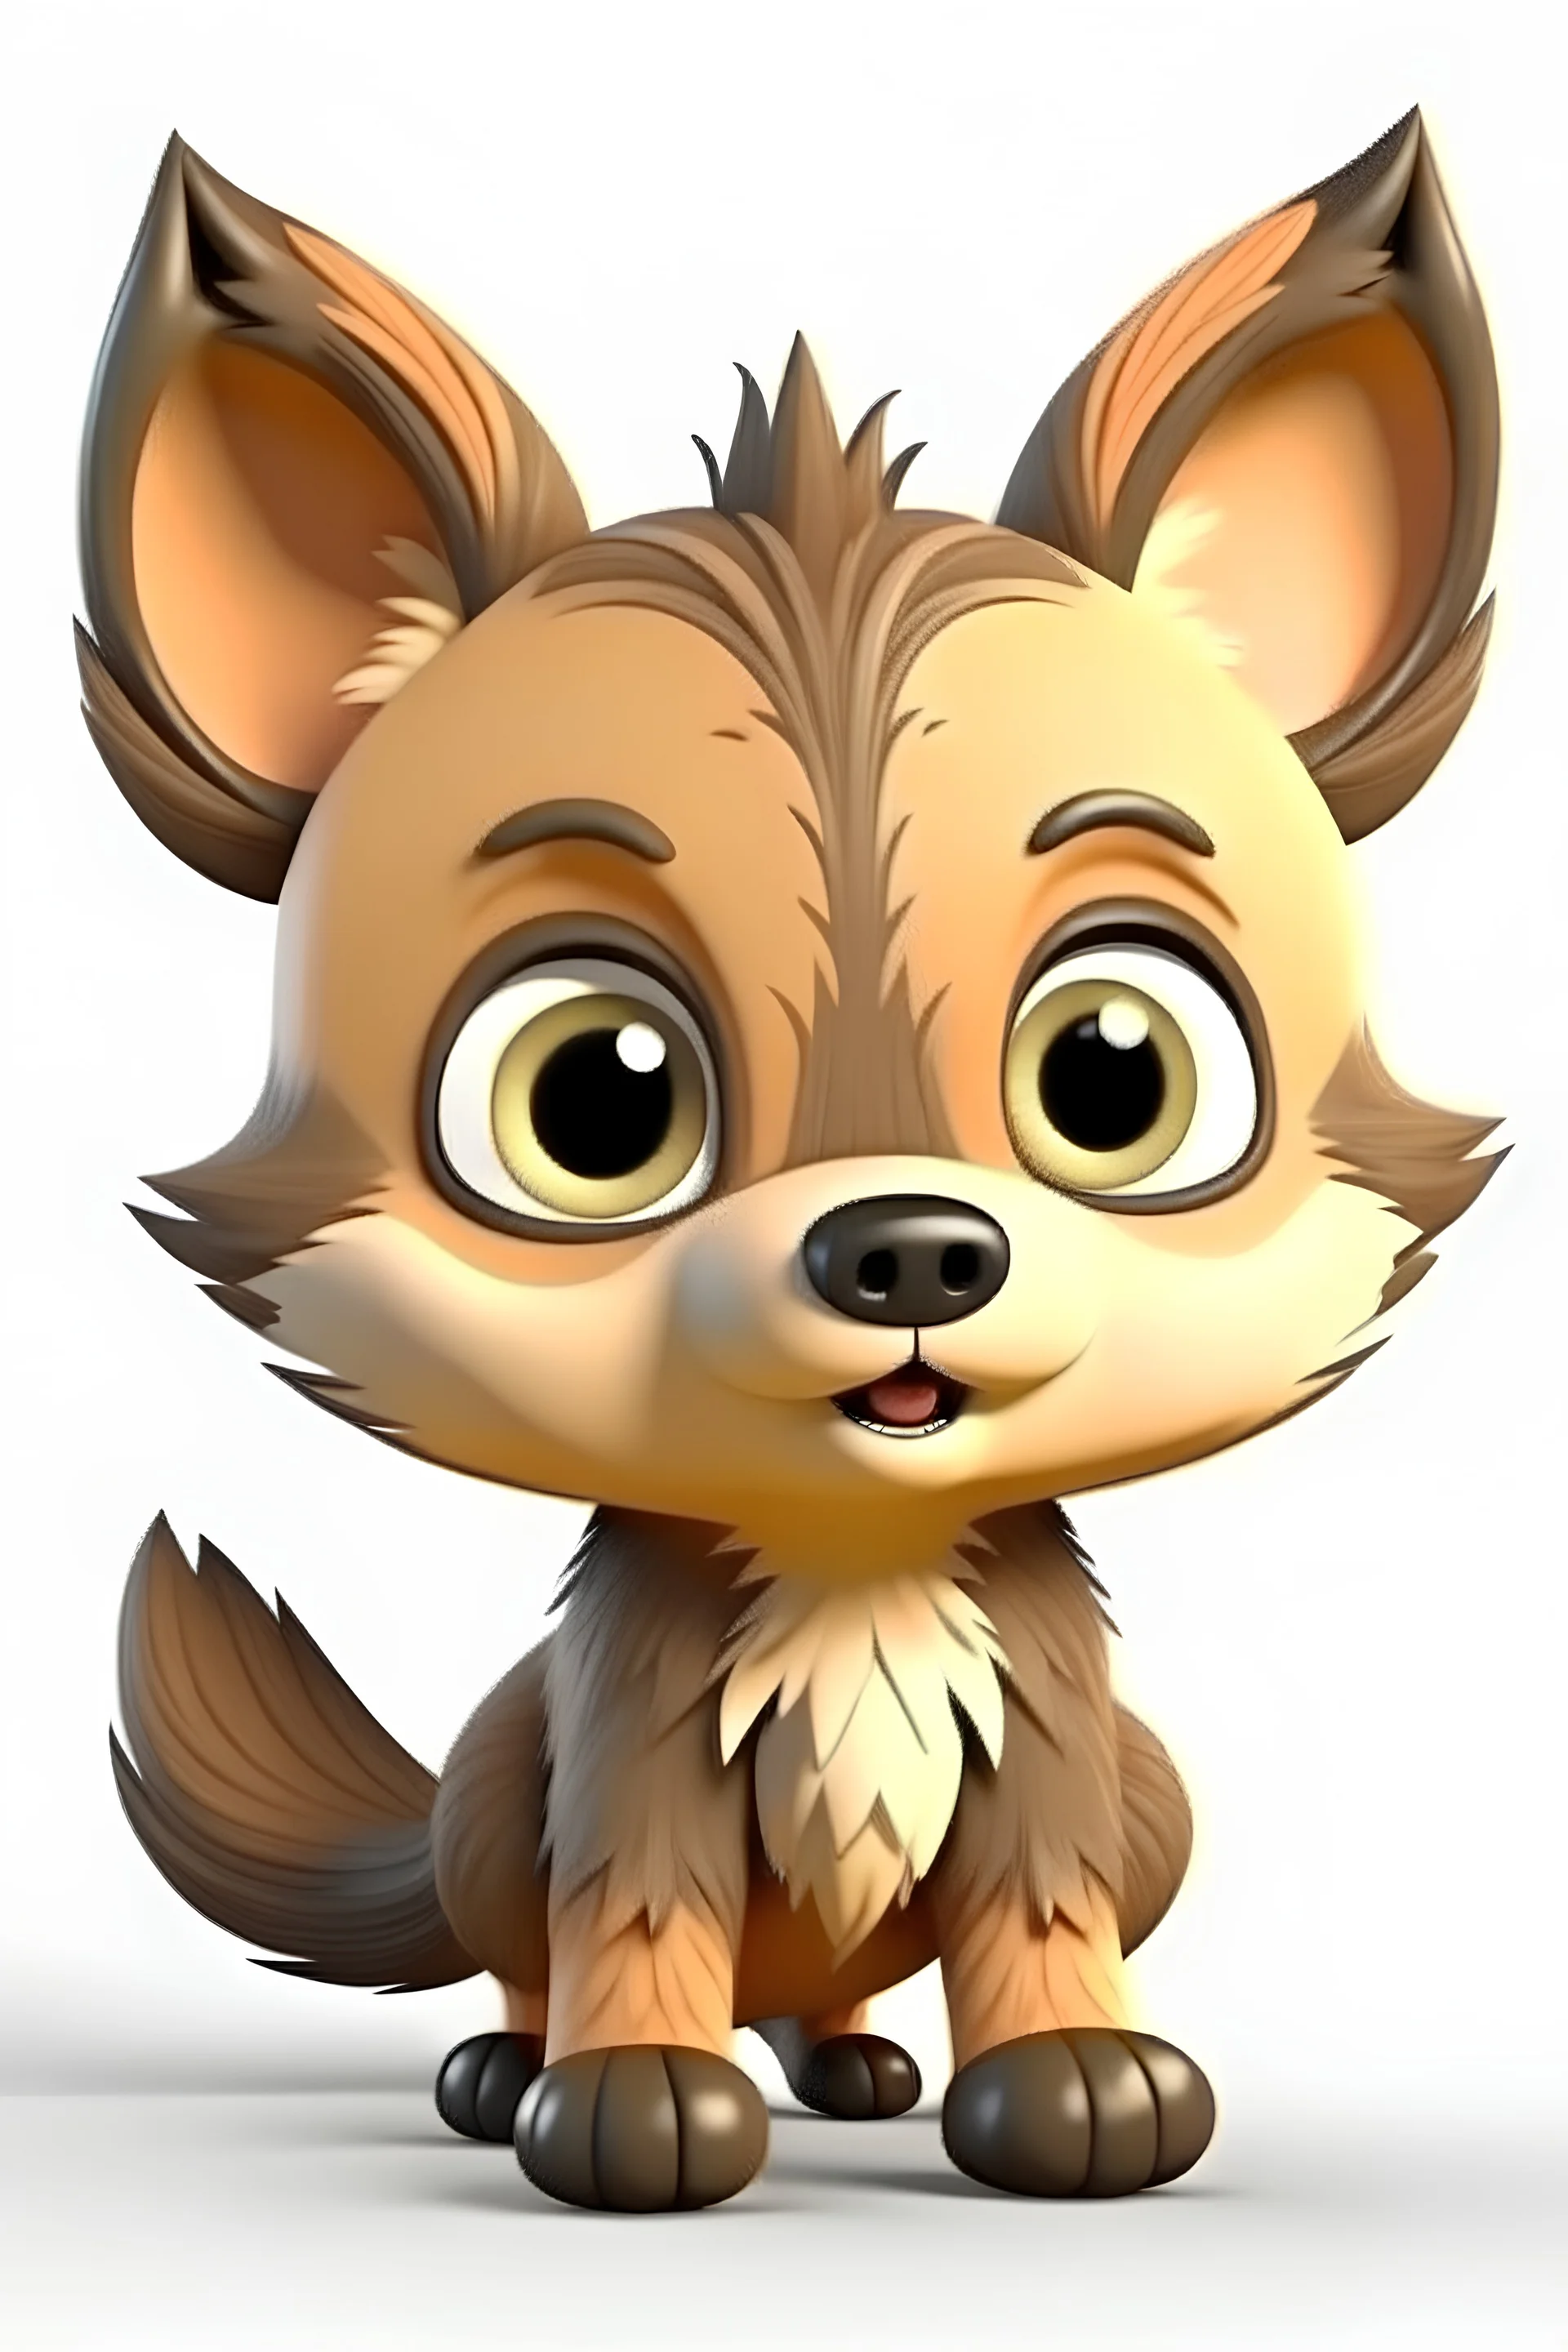 A cute brown baby wolf with big eyes, animated, cartoon, unreal, no background.